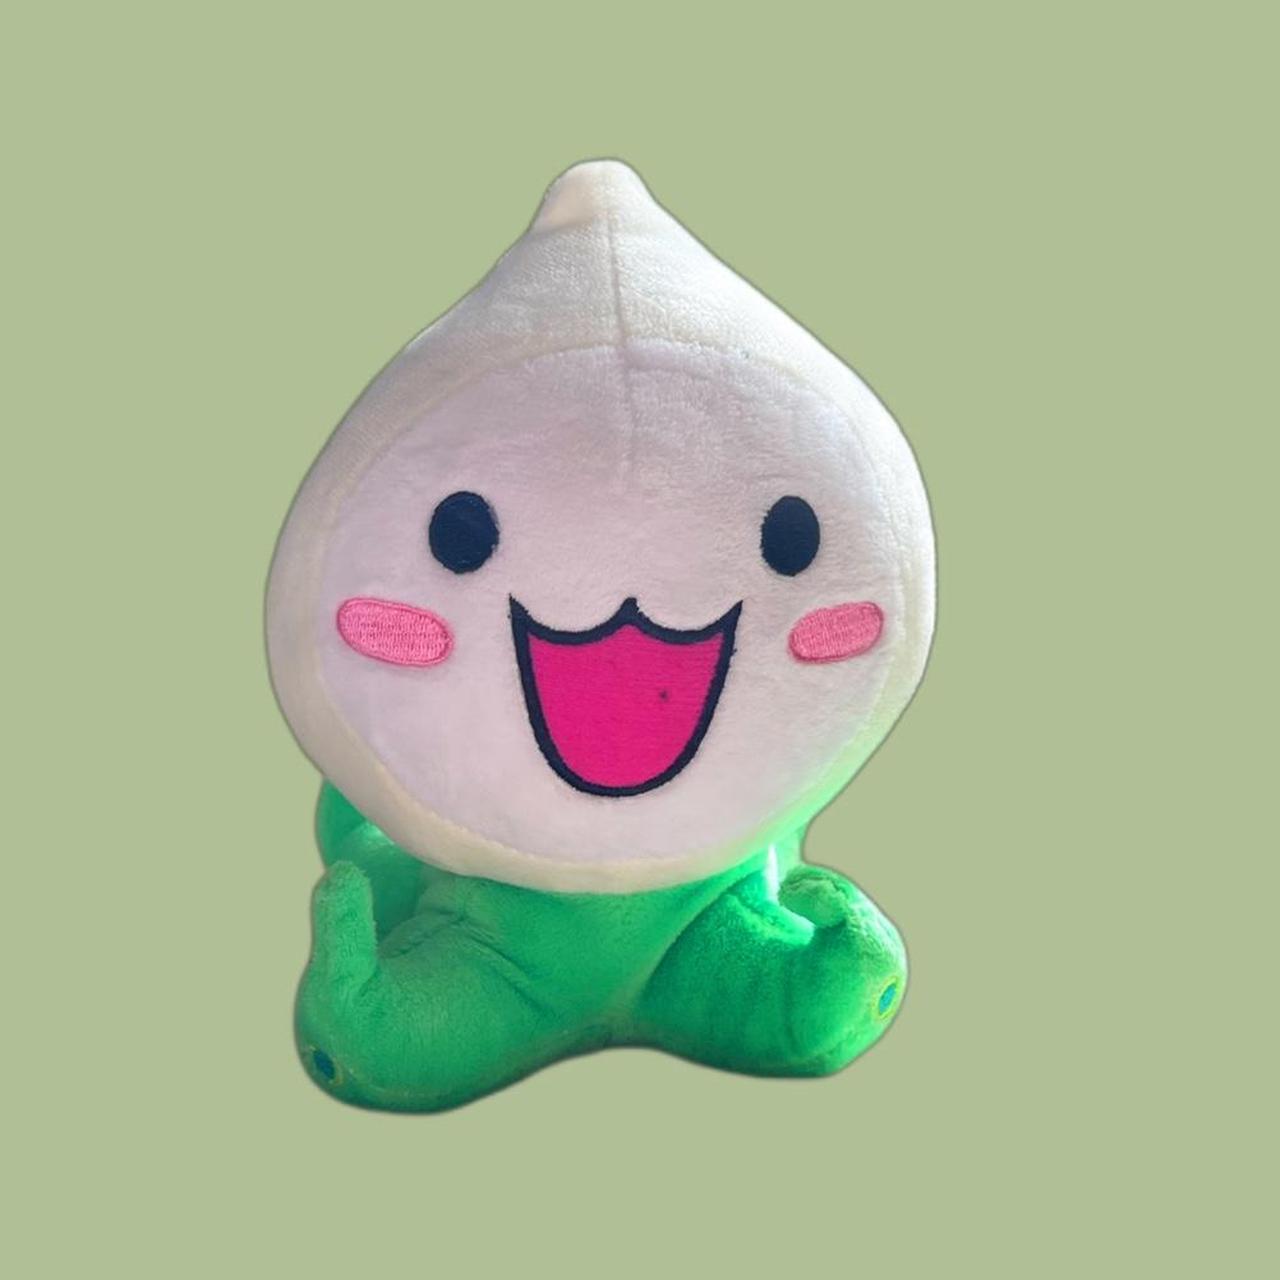 Product Image 1 - Overwatch Pachimari Plush
Good condition, about